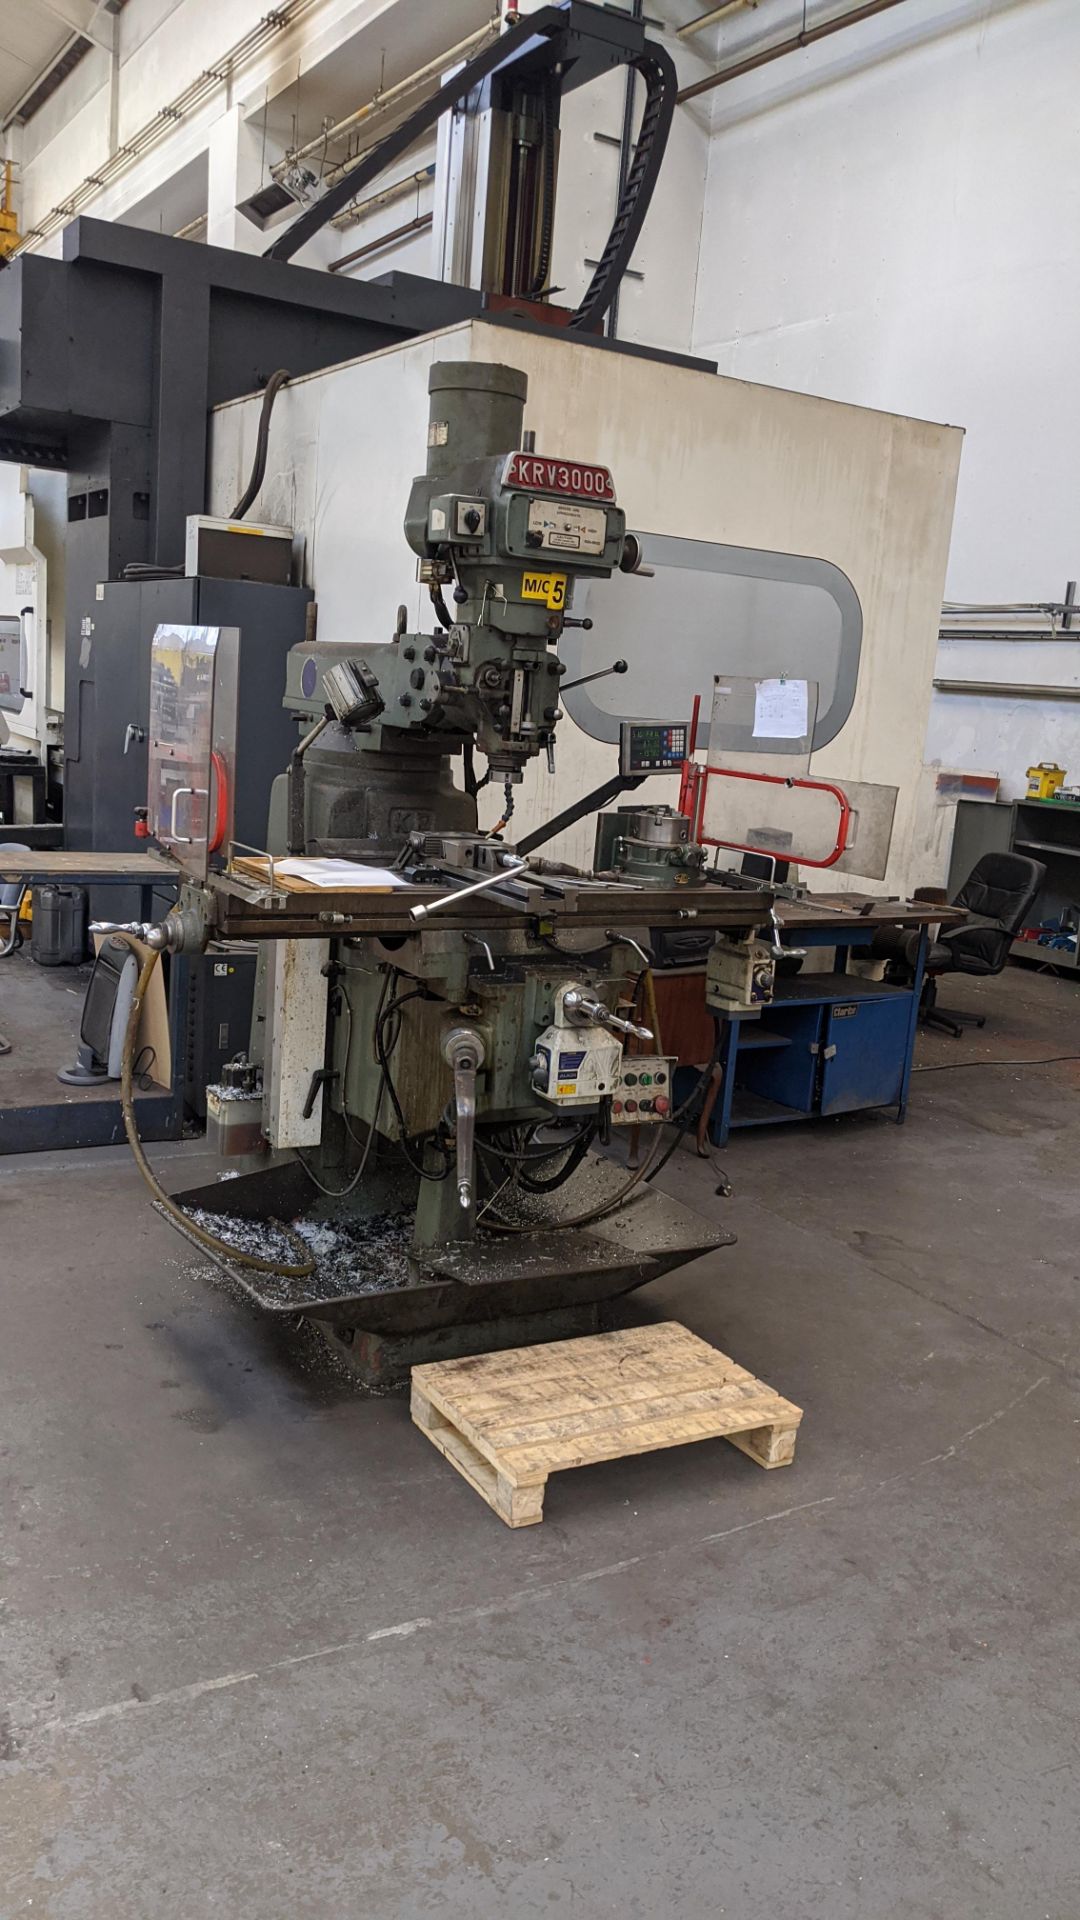 1998 King Rich KRV3000-V milling machine, serial no. 8470. Includes Newall Topaz Mill controller. - Image 2 of 15